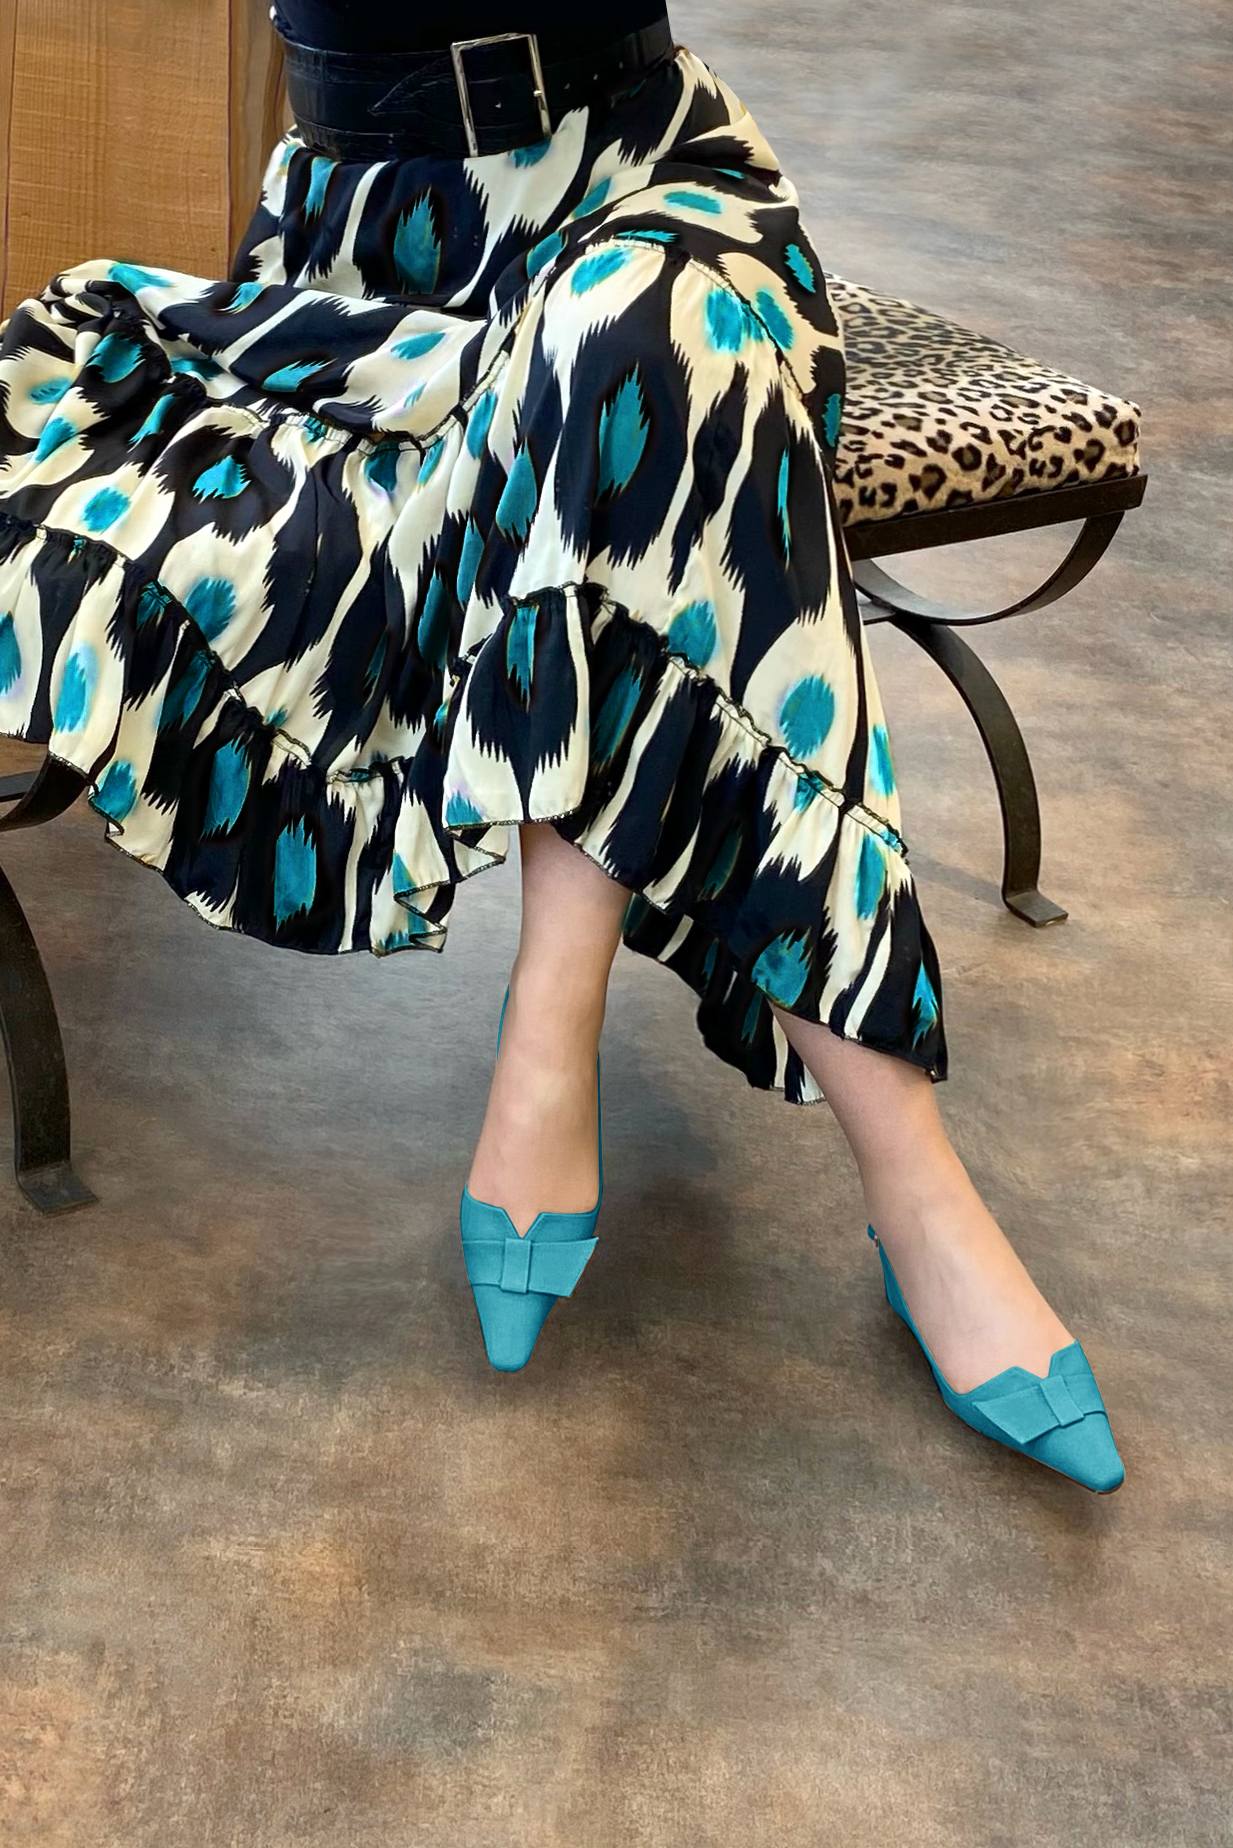 Turquoise blue women's open back shoes, with a knot. Tapered toe. Low block heels. Worn view - Florence KOOIJMAN